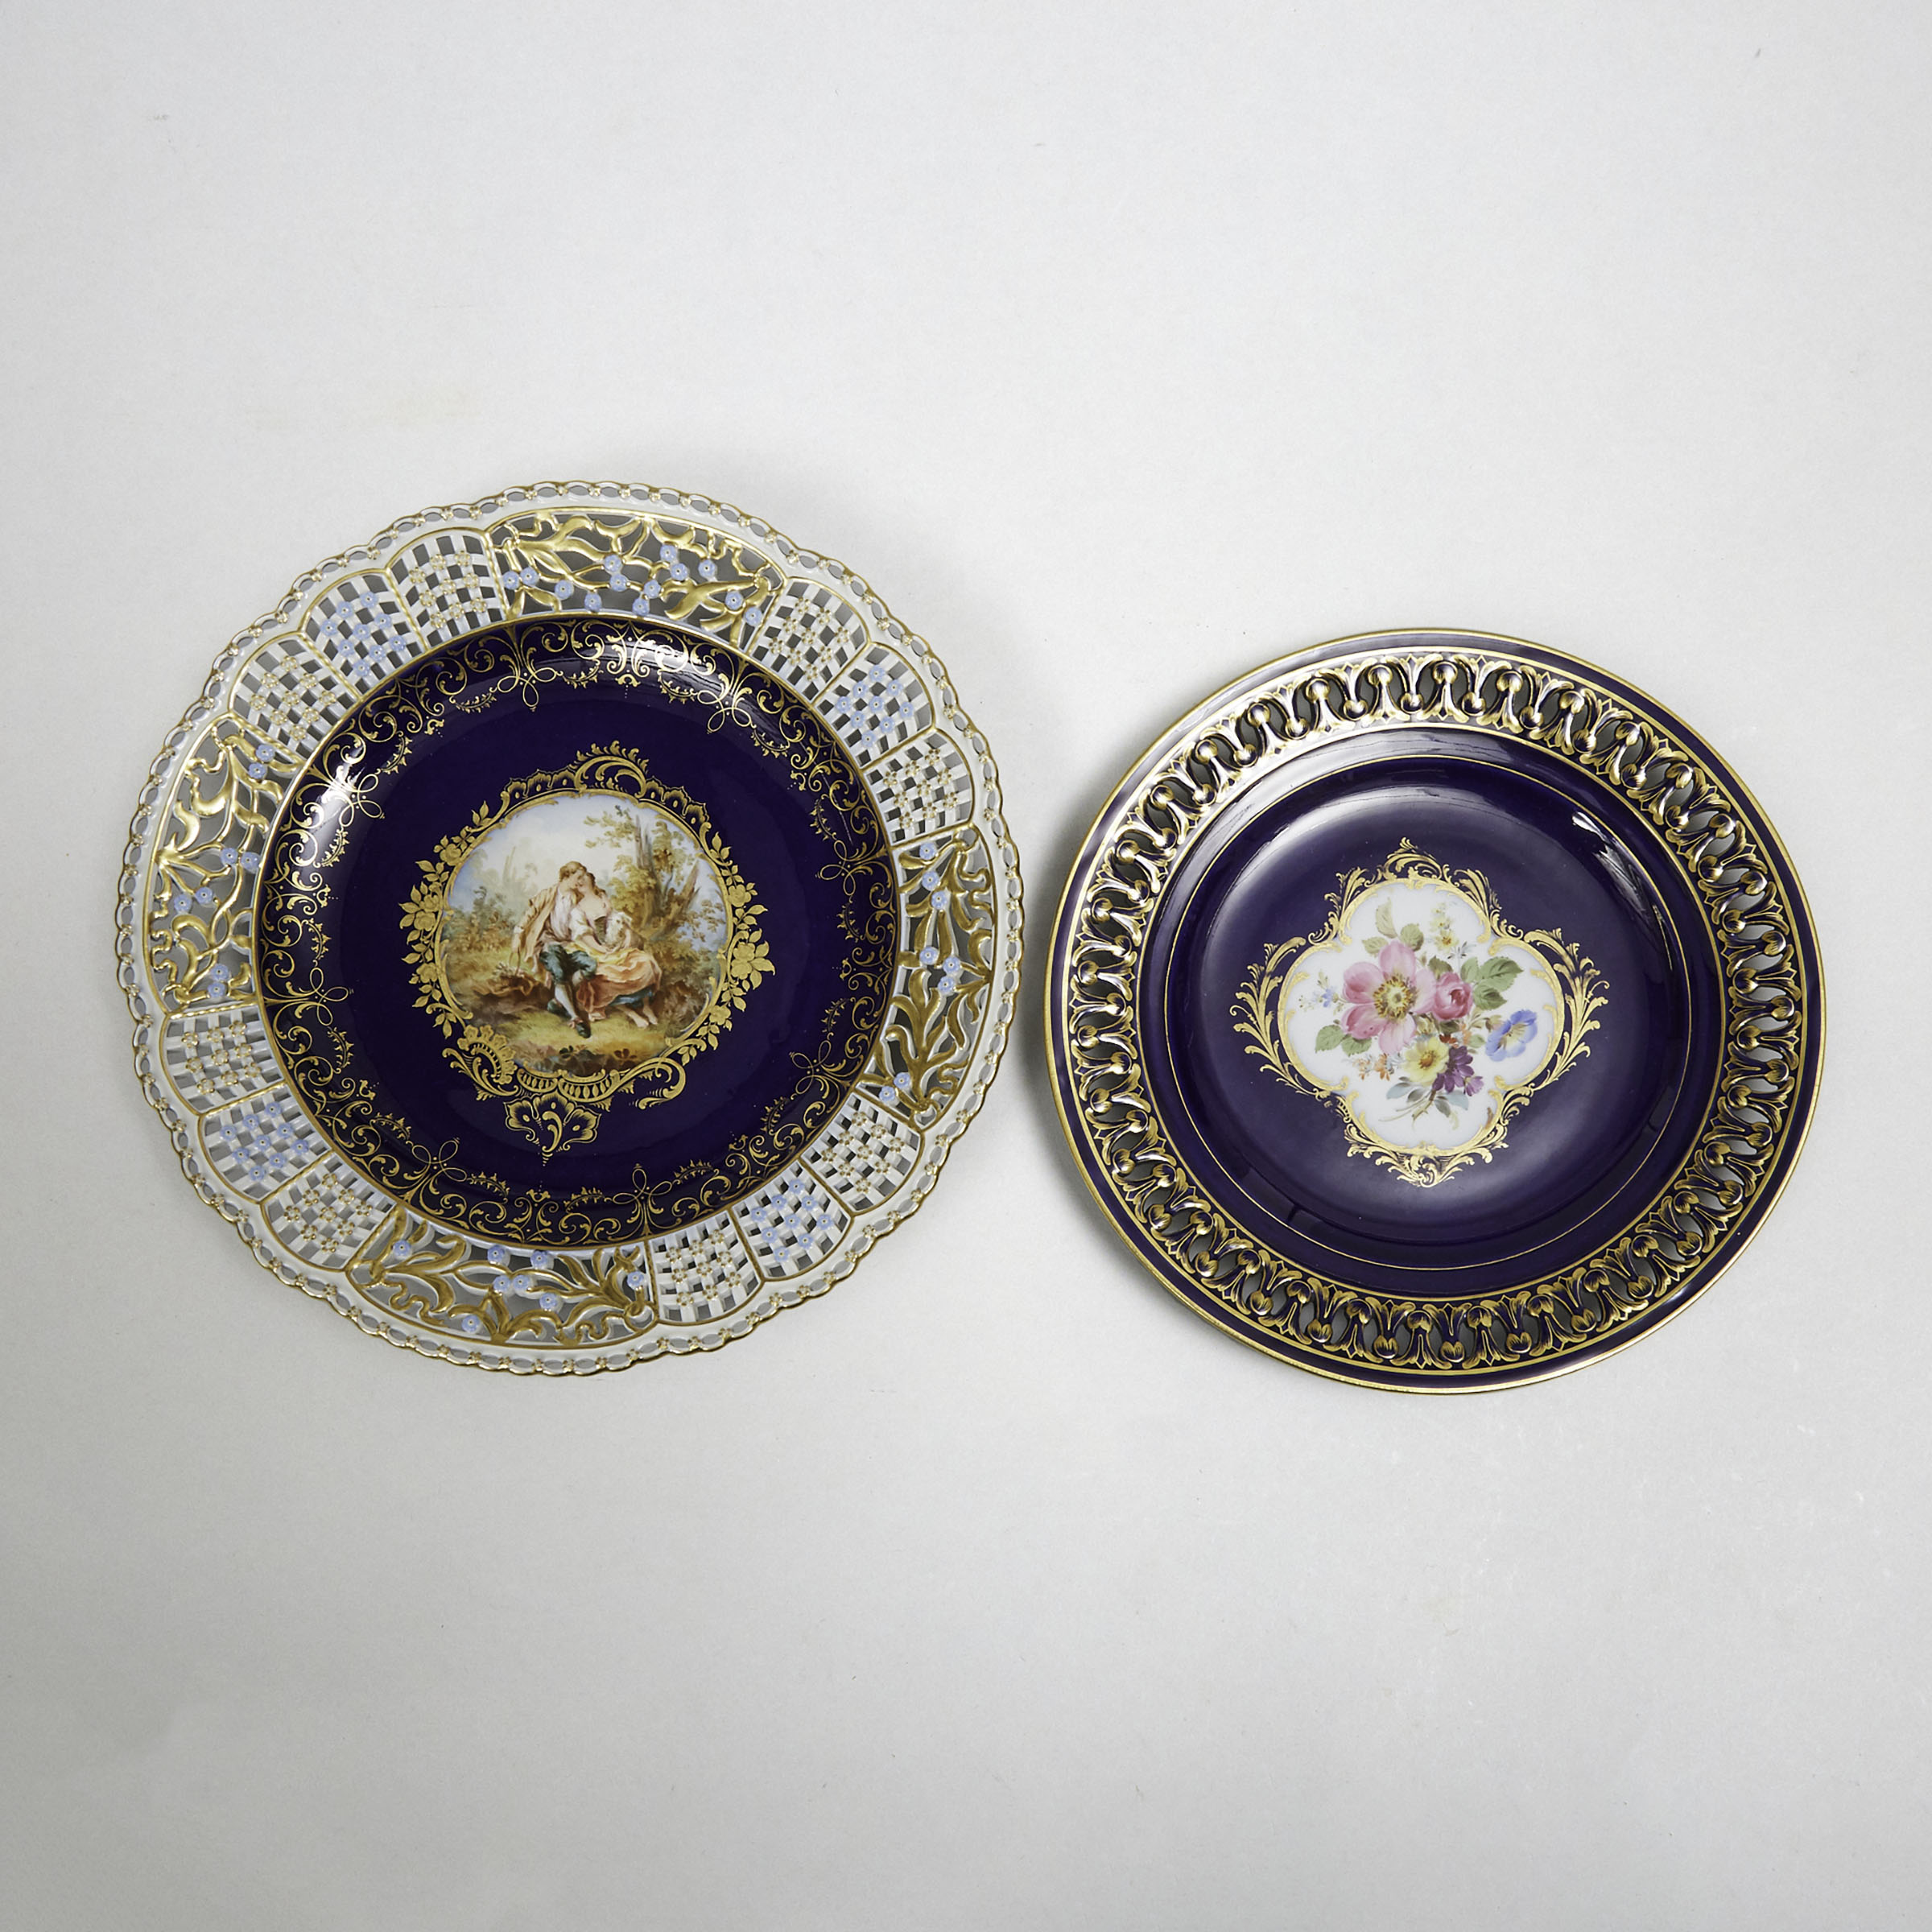 Two Meissen Reticulated Plates, late 19th/early 20th century